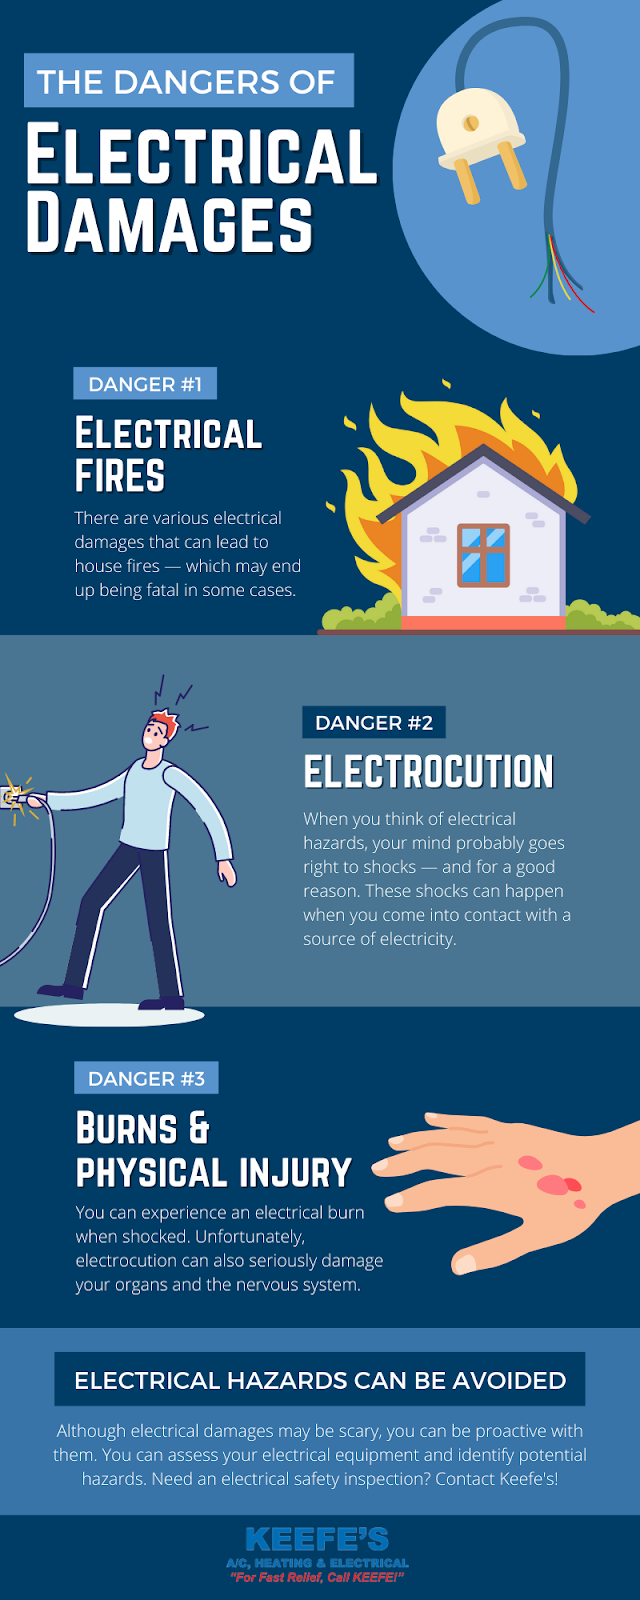 Electrical Damages
THE DANGERS OF
DANGER #1
There are various electrical damages that can lead to house fires — which may end up being fatal in some cases.
ELECTRICAL HAZARDS CAN BE AVOIDED
Electrical FIRES
DANGER #2
When you think of electrical hazards, your mind probably goes right to shocks — and for a good reason. These shocks can happen when you come into contact with a source of electricity.
ELECTROCUTION
DANGER #3
You can experience an electrical burn when shocked. Unfortunately, electrocution can also seriously damage your organs and the nervous system.
Burns & physical injury
Although electrical damages may be scary, you can be proactive with them. You can assess your electrical equipment and identify potential hazards. Need an electrical safety inspection? Contact Keefe's!